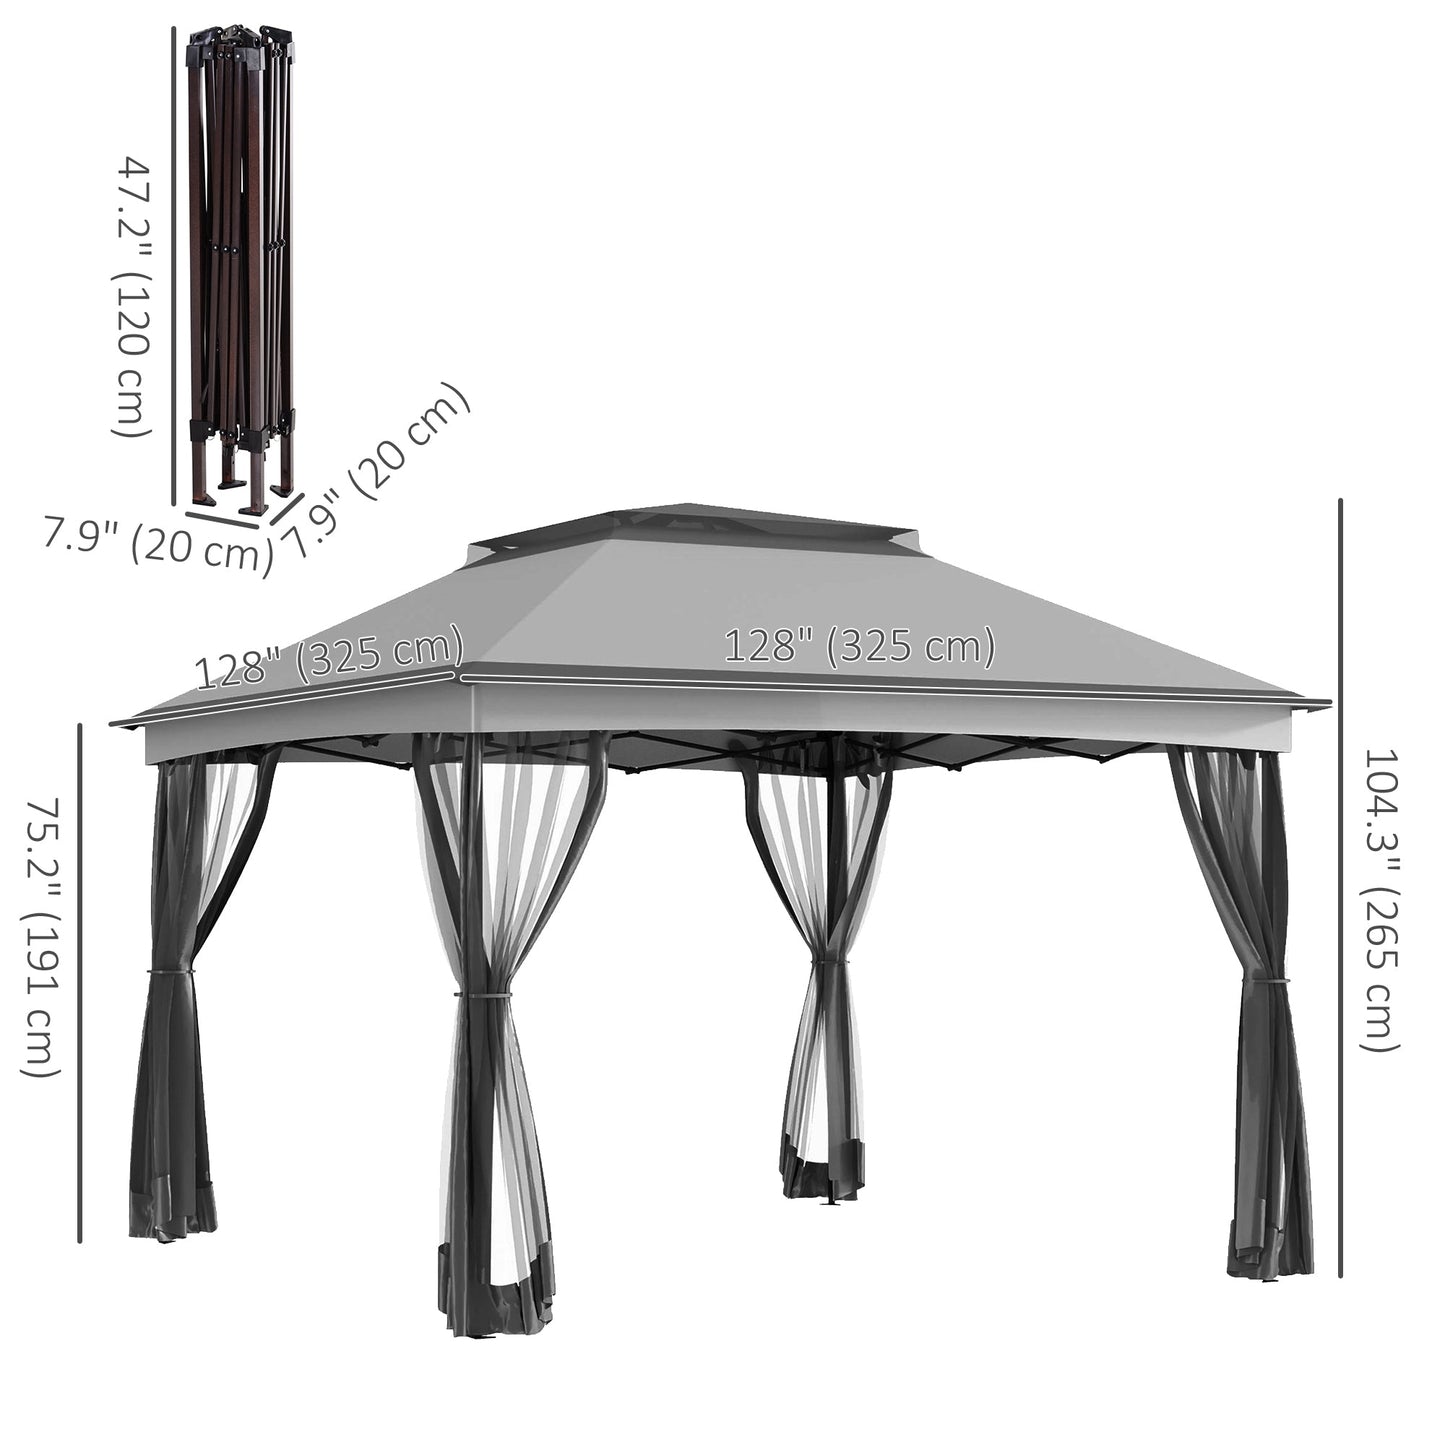 11' x 11' Pop Up Canopy 2-Tier Soft Top Shelter Event Tent w/ Netting Carry Bag for Patio Backyard Garden, Light Grey - Gallery Canada